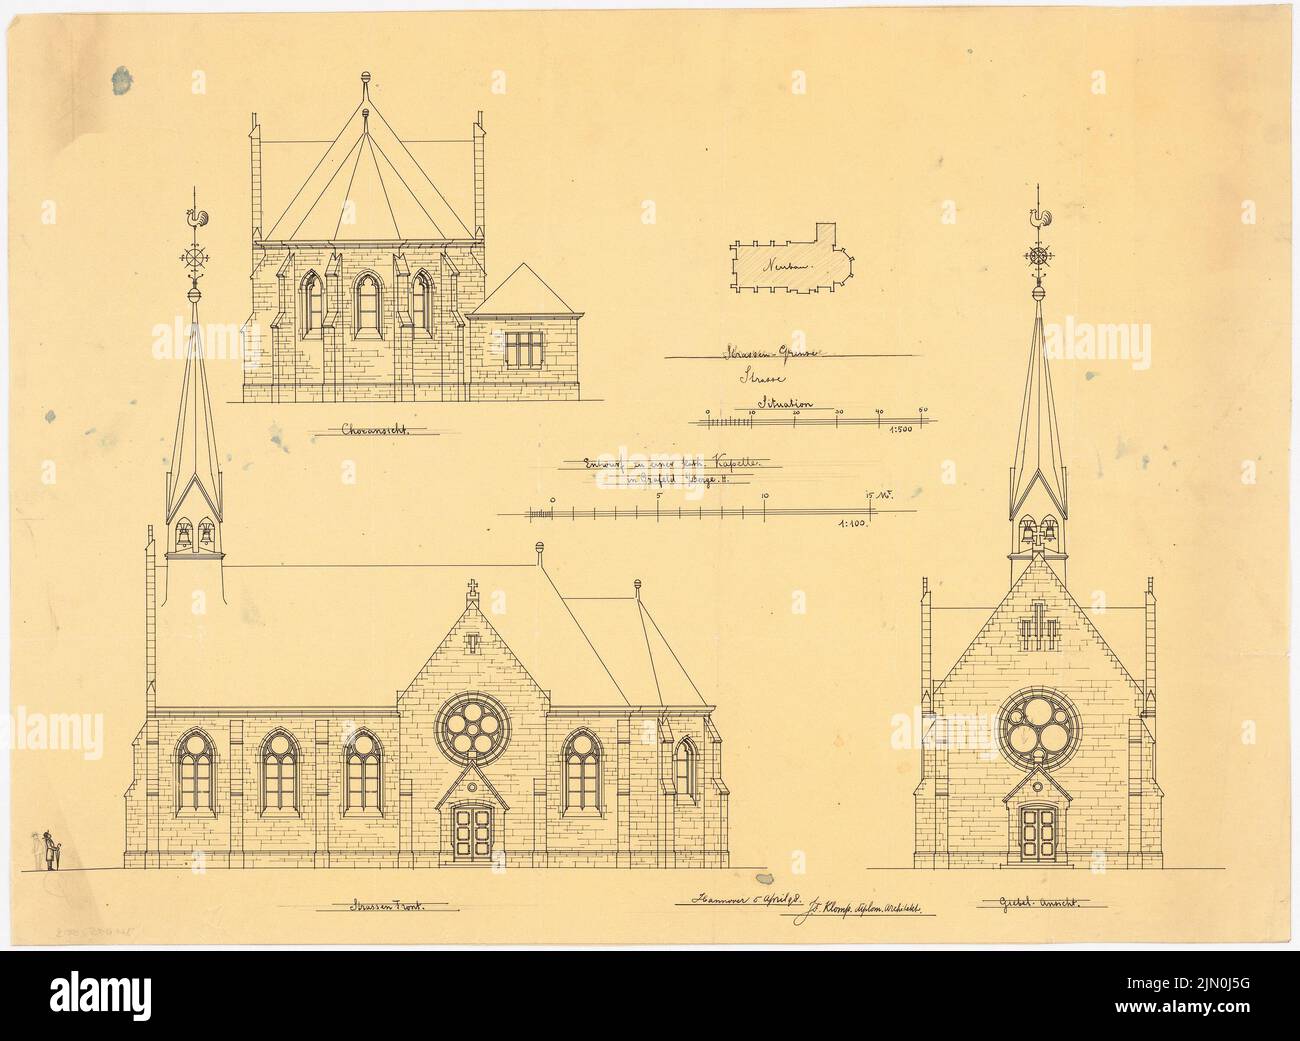 Klomp Johannes Franziskus (1865-1946), Herz-Jesu-Kirche, Grafeld (05.04.1898): Situation plan 1: 500, choir view, view of the street front (south) and gable view 1: 100. Ink on transparent, 44.8 x 61.3 cm (including scan edges) Klomp Johannes Franziskus  (1865-1946): Herz-Jesu-Kirche, Grafeld Stock Photo